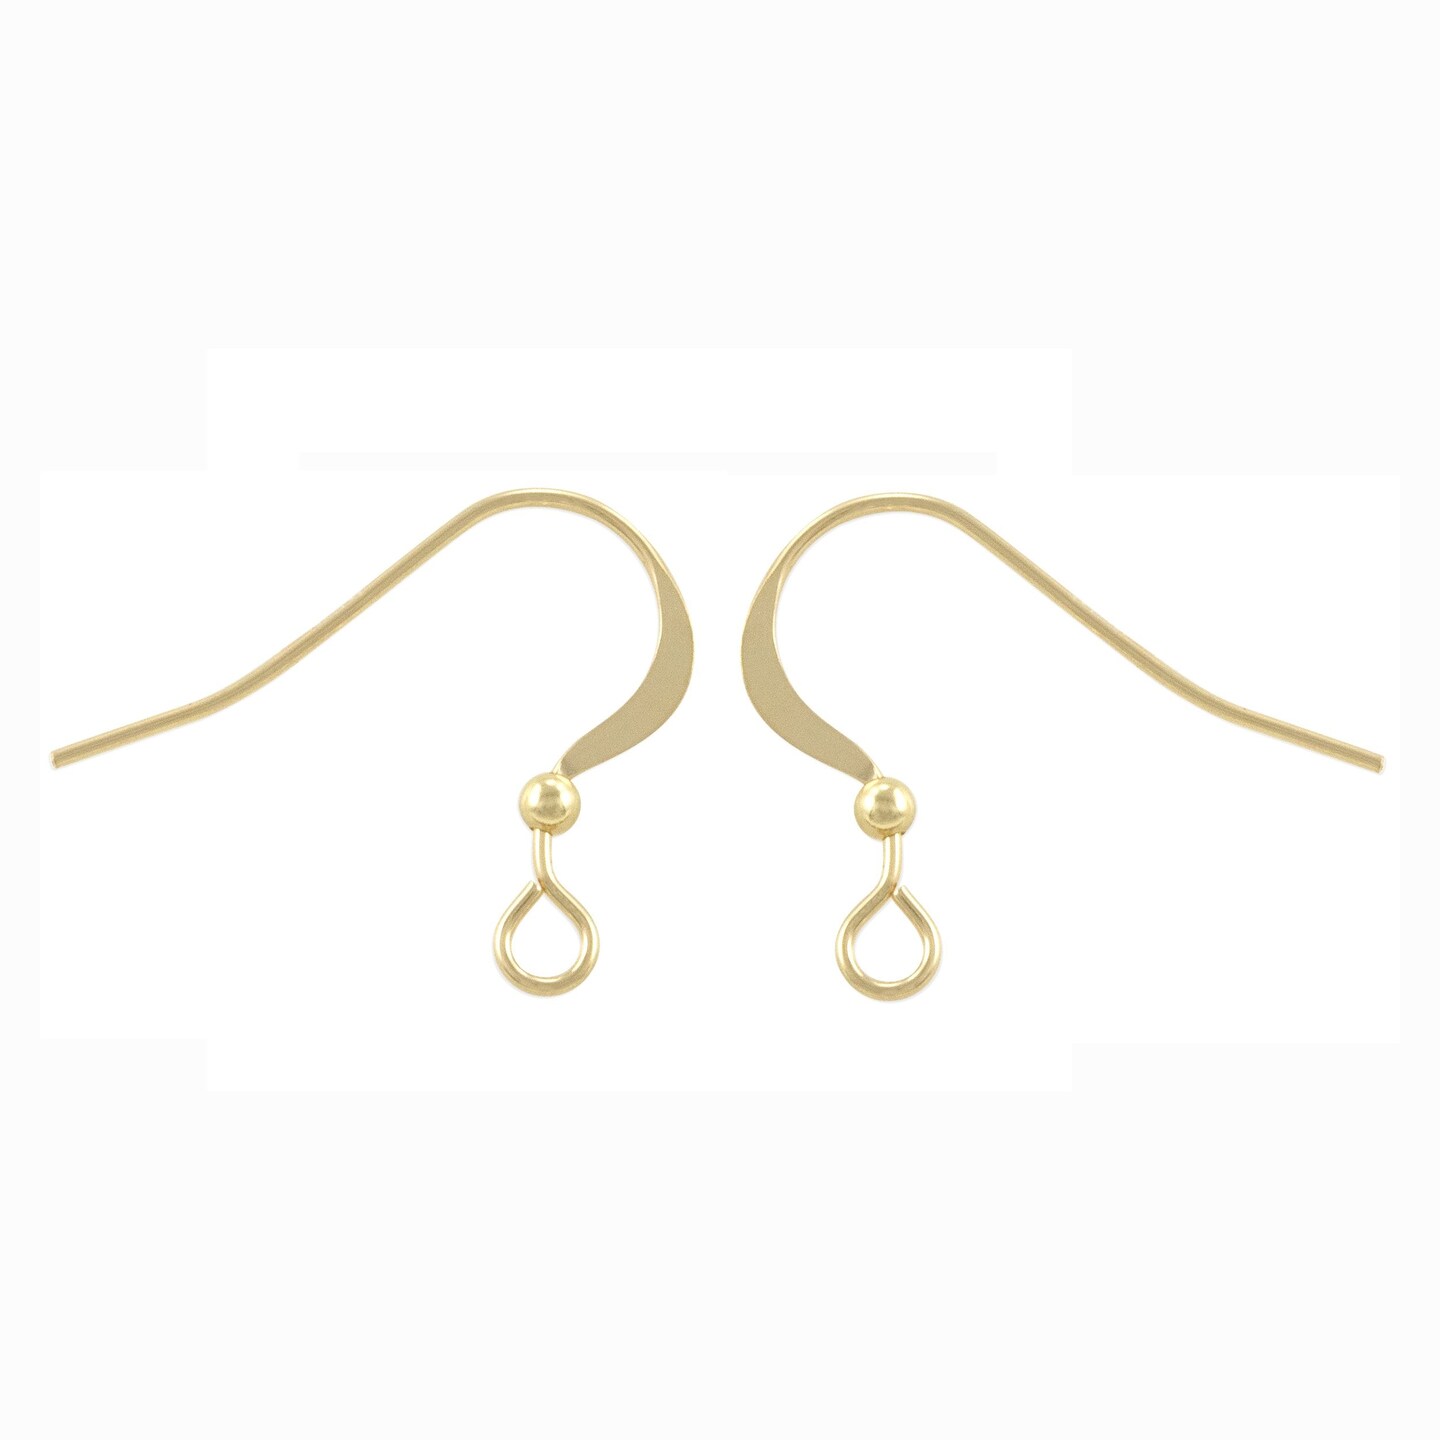 JewelrySupply Gold Filled Flat Fish Hook Earring Wires with2mm Bead (1 Pair  of Gold Filled Earrings)